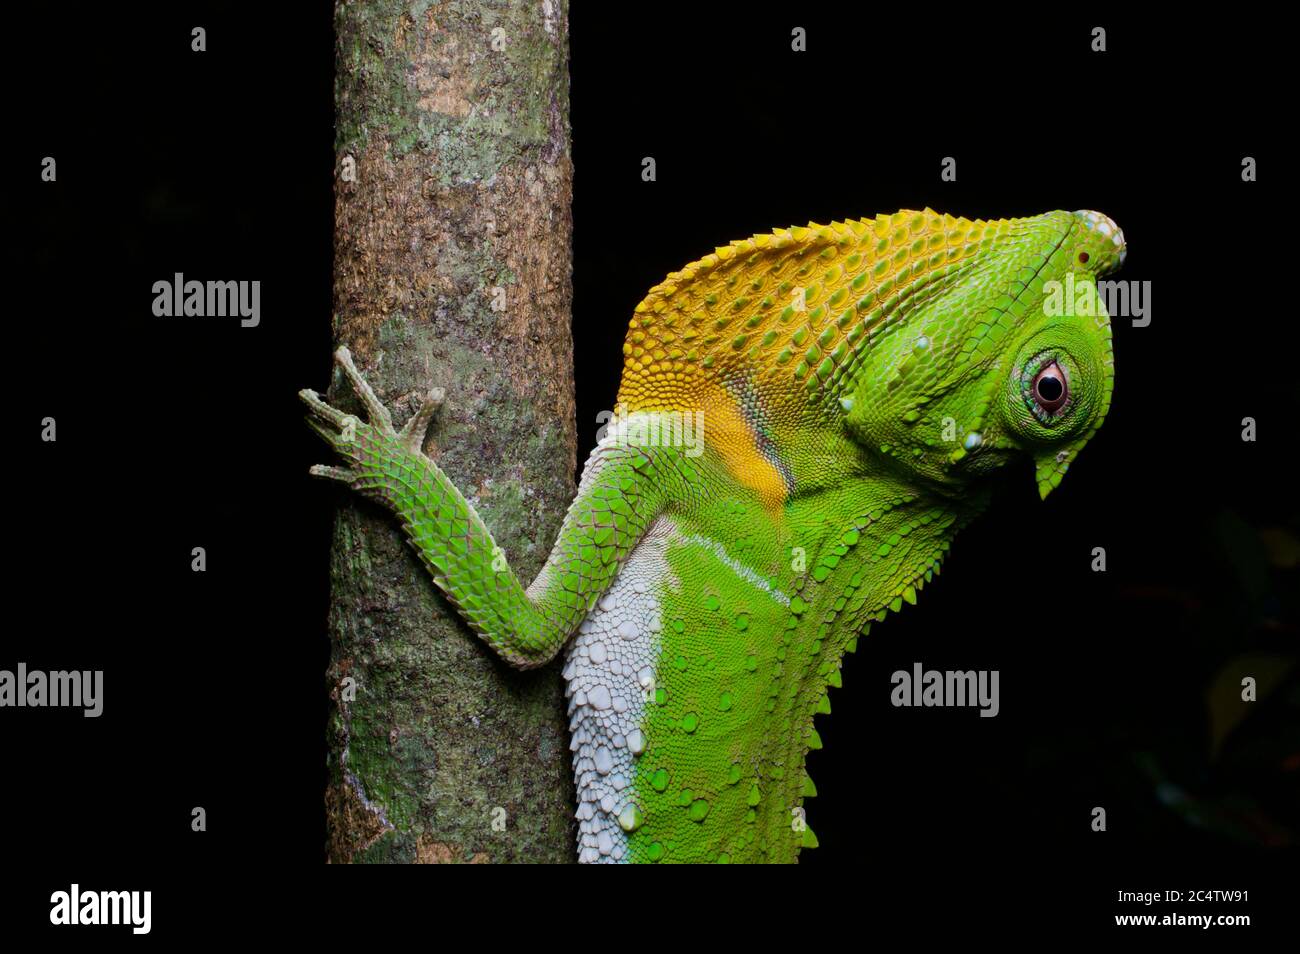 A Hump-nosed Lizard (Lyriocephalus scutatus) clinging to a branch at night in Sri Lanka, with dewlap extended. Stock Photo